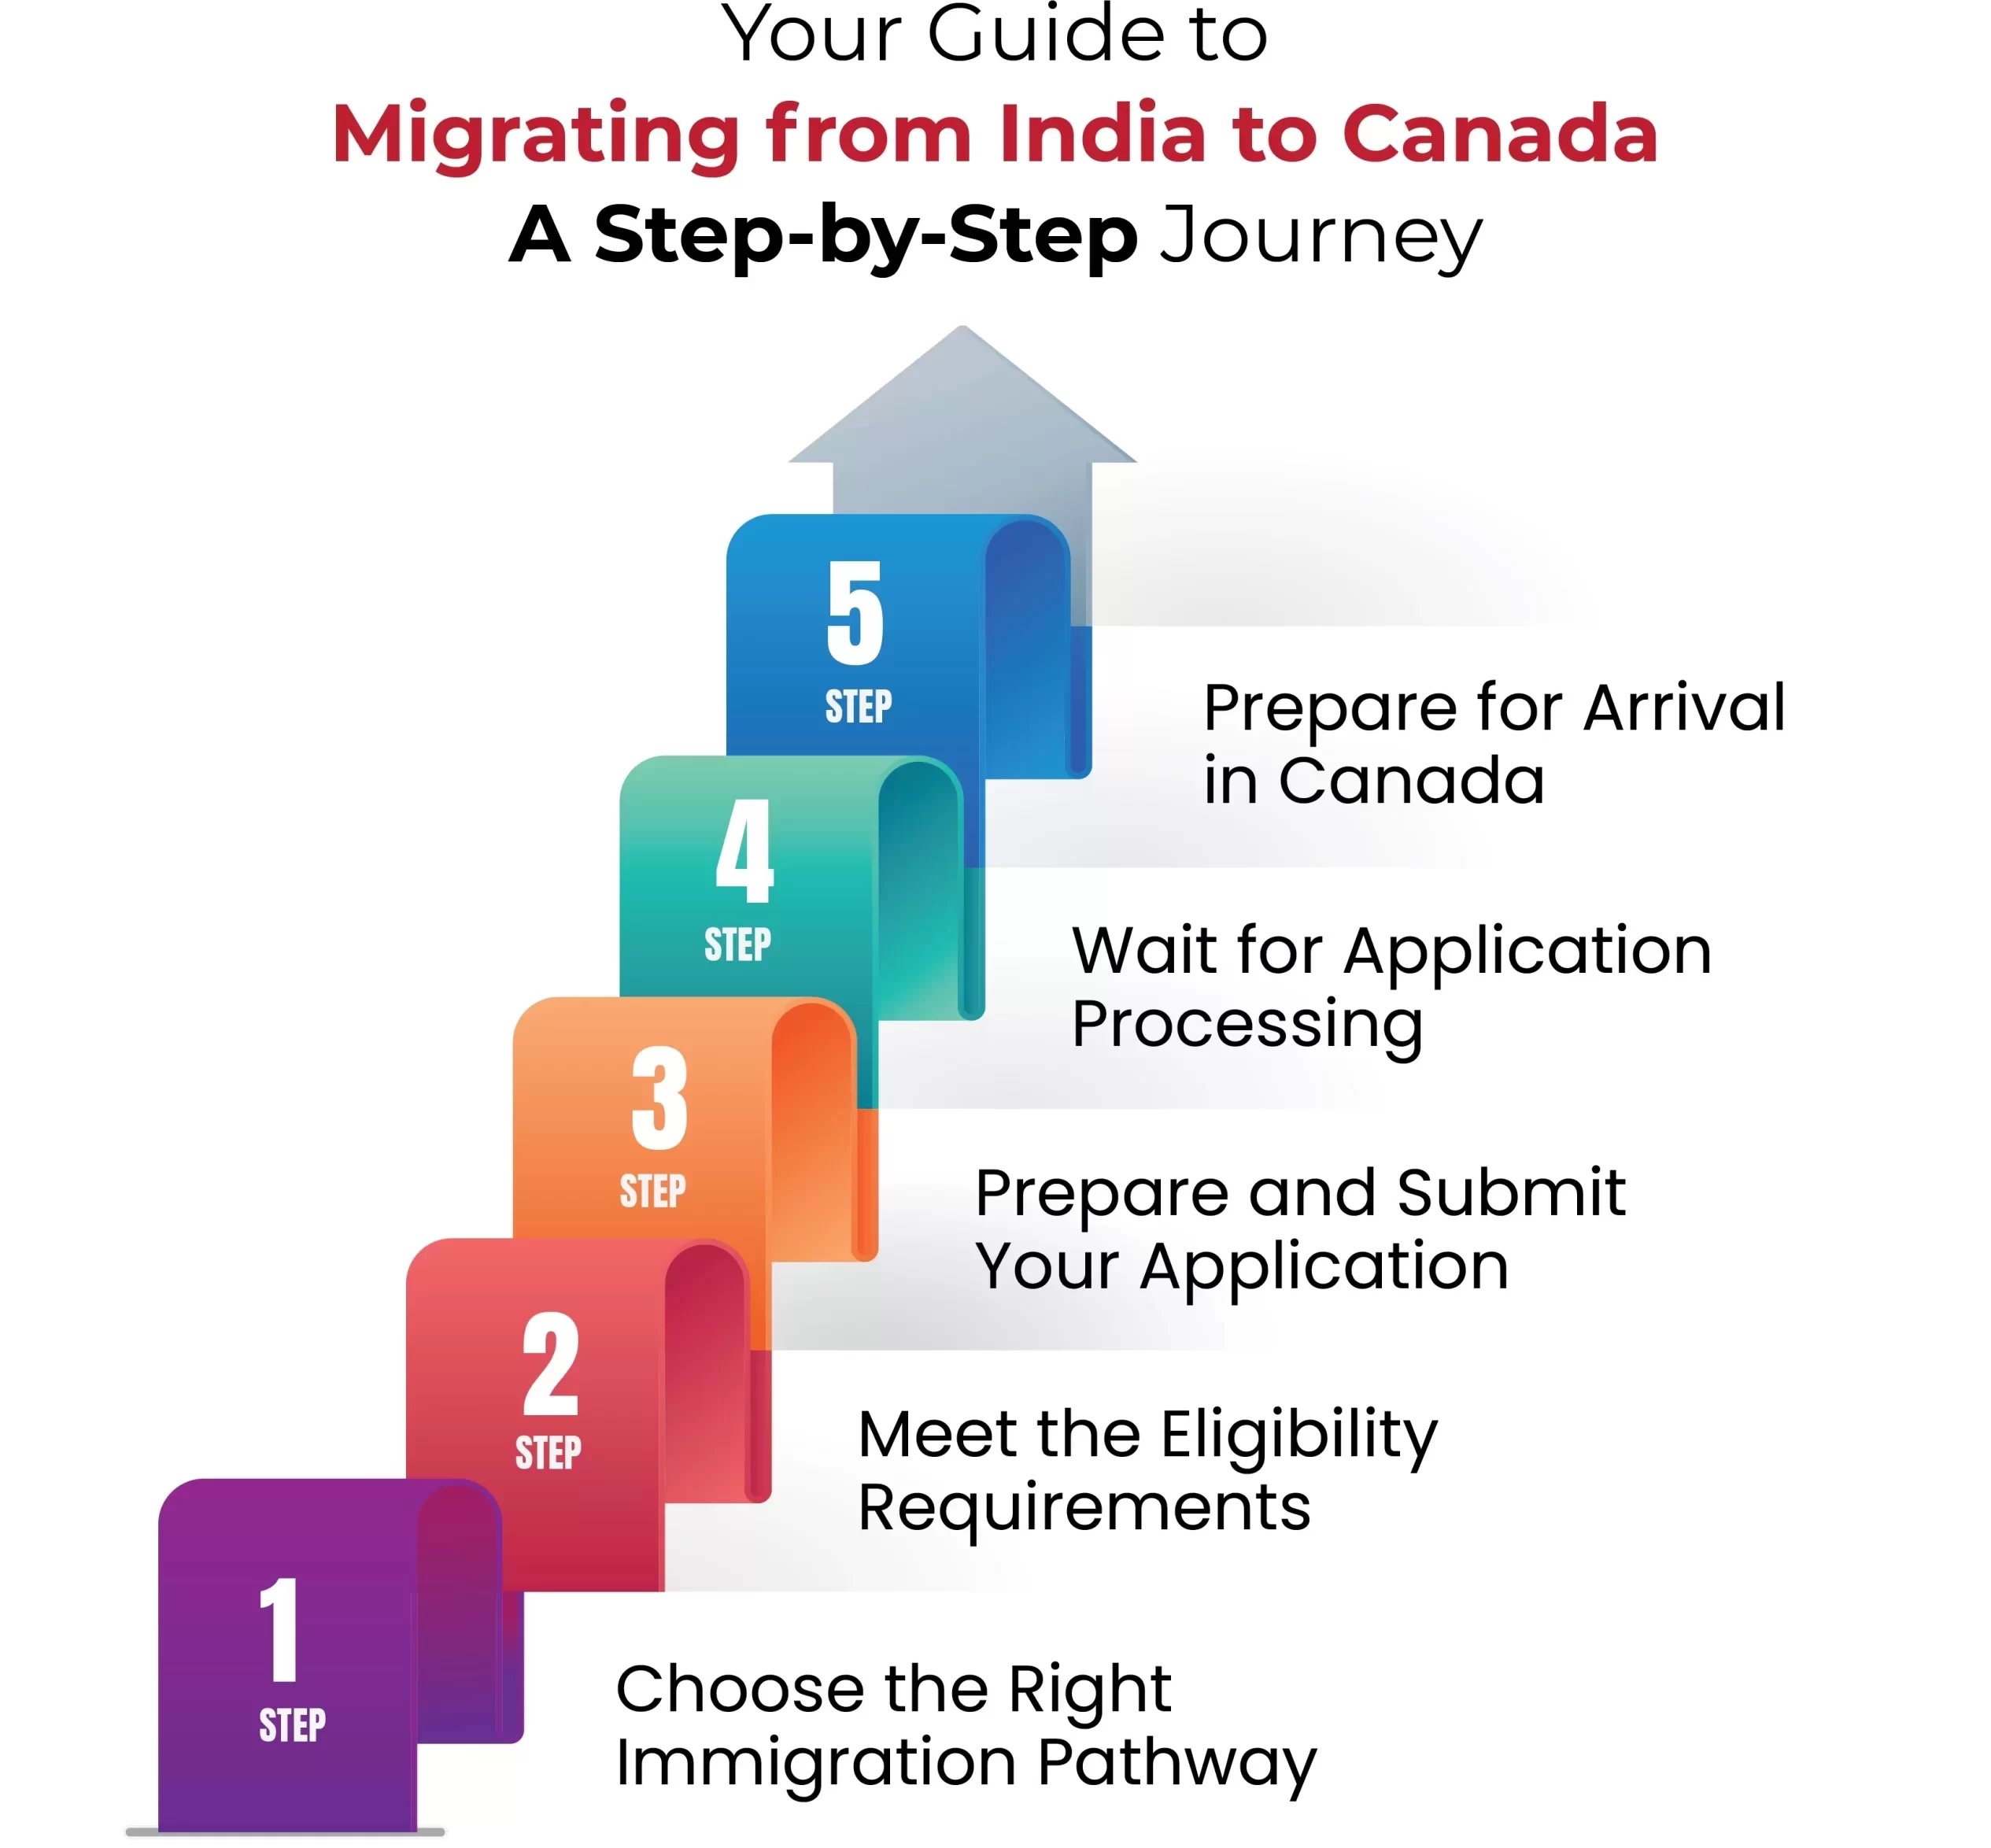 Your Guide to Migrating from India to Canada: A Step-by-Step Journey